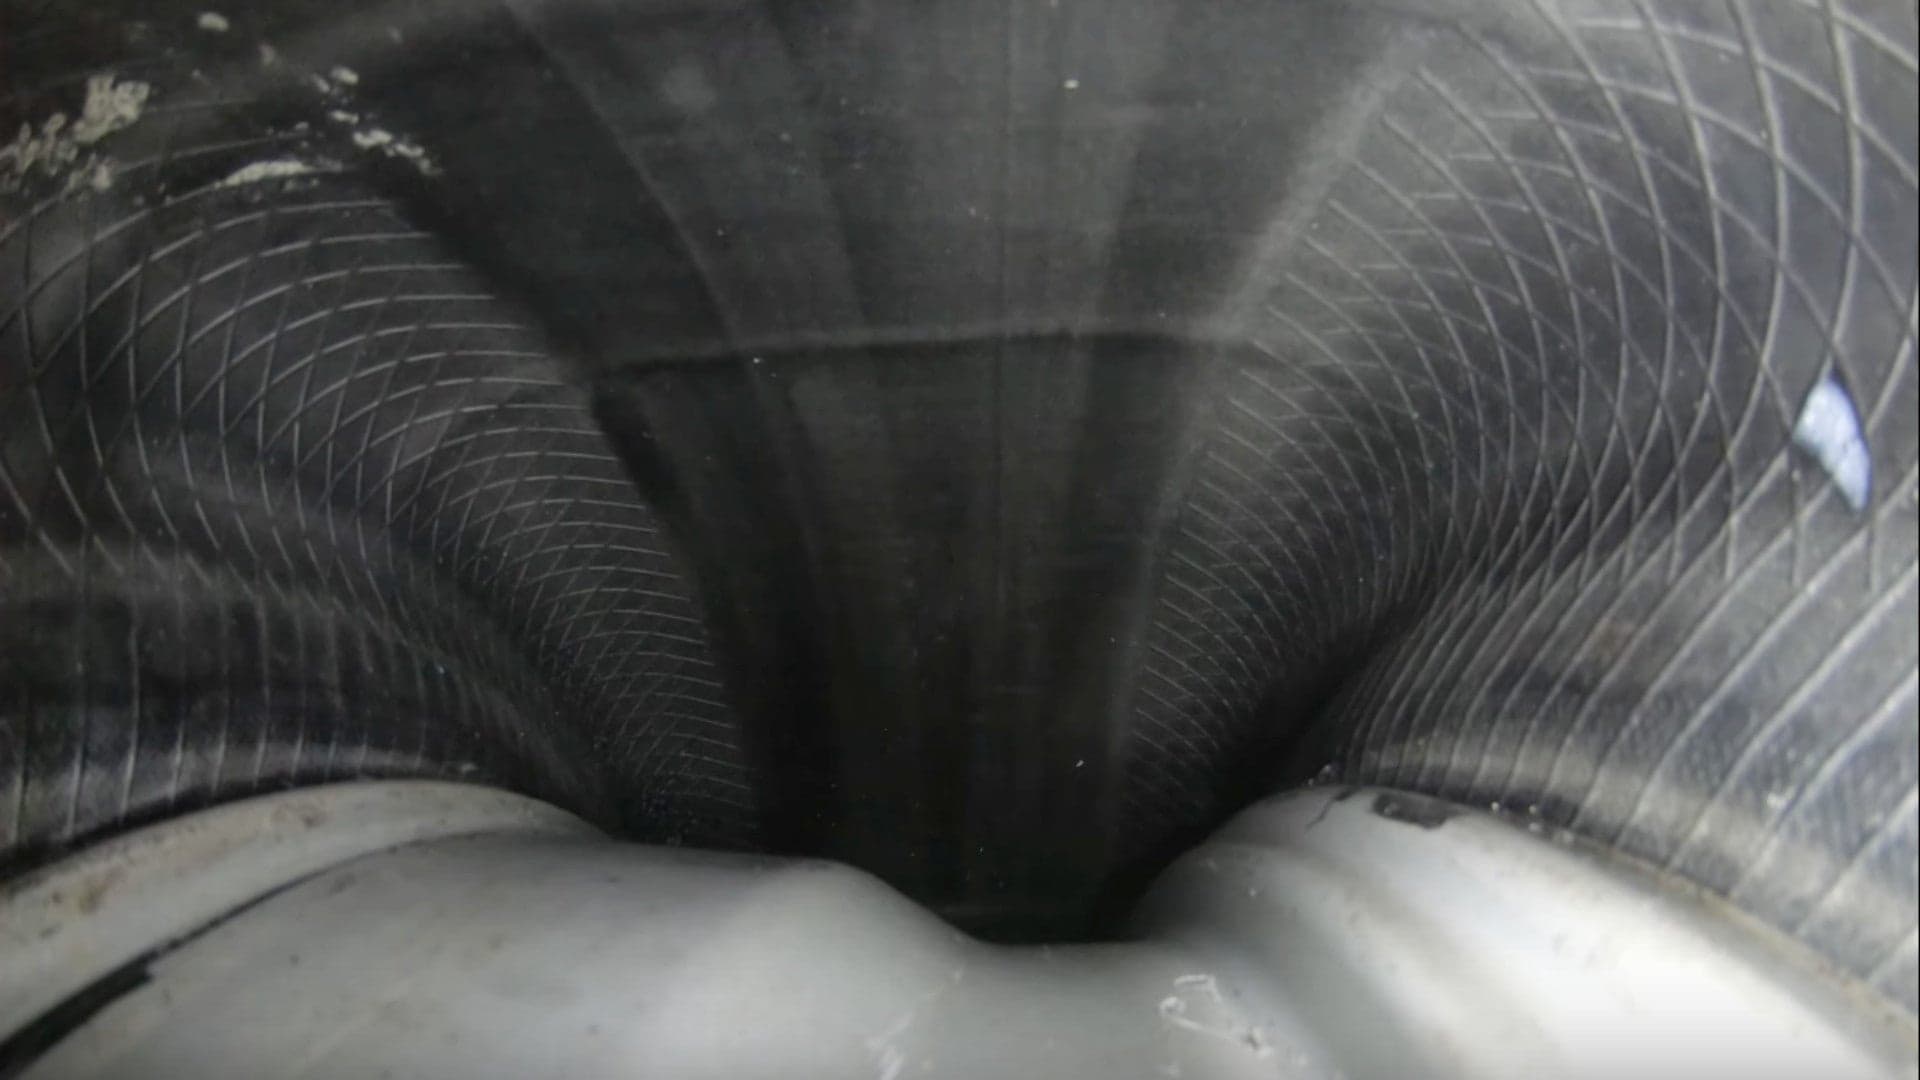 Mounting a GoPro Inside a Car Tire Shows a Perspective You’ve Probably Never Thought Of